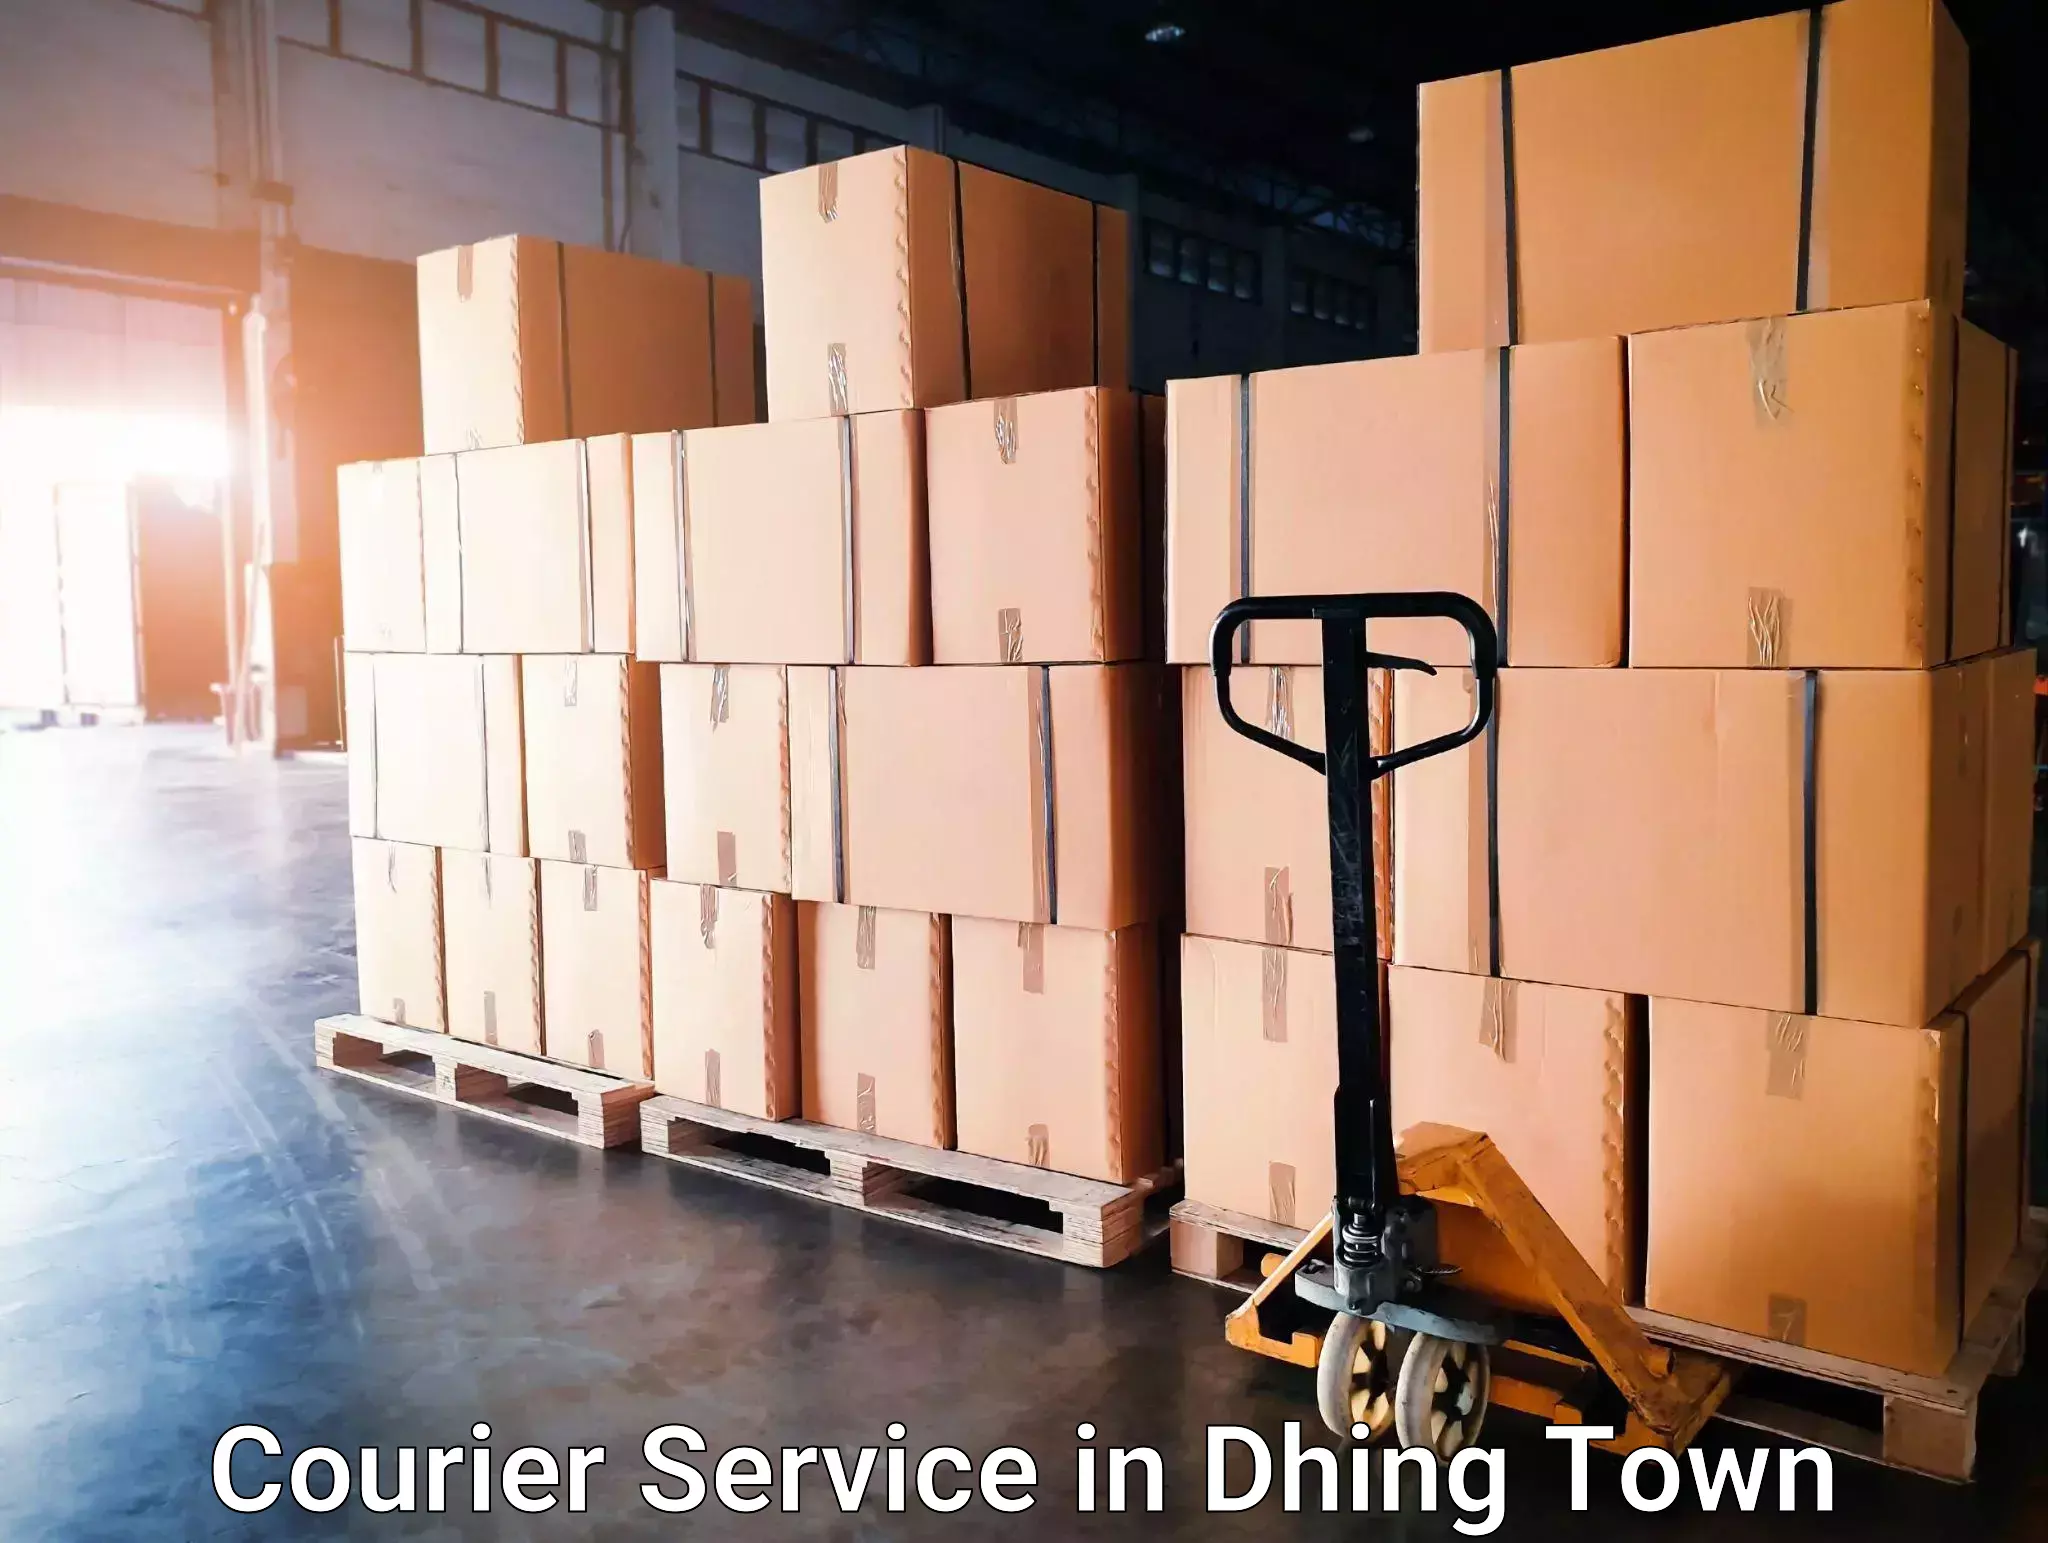 Cash on delivery service in Dhing Town